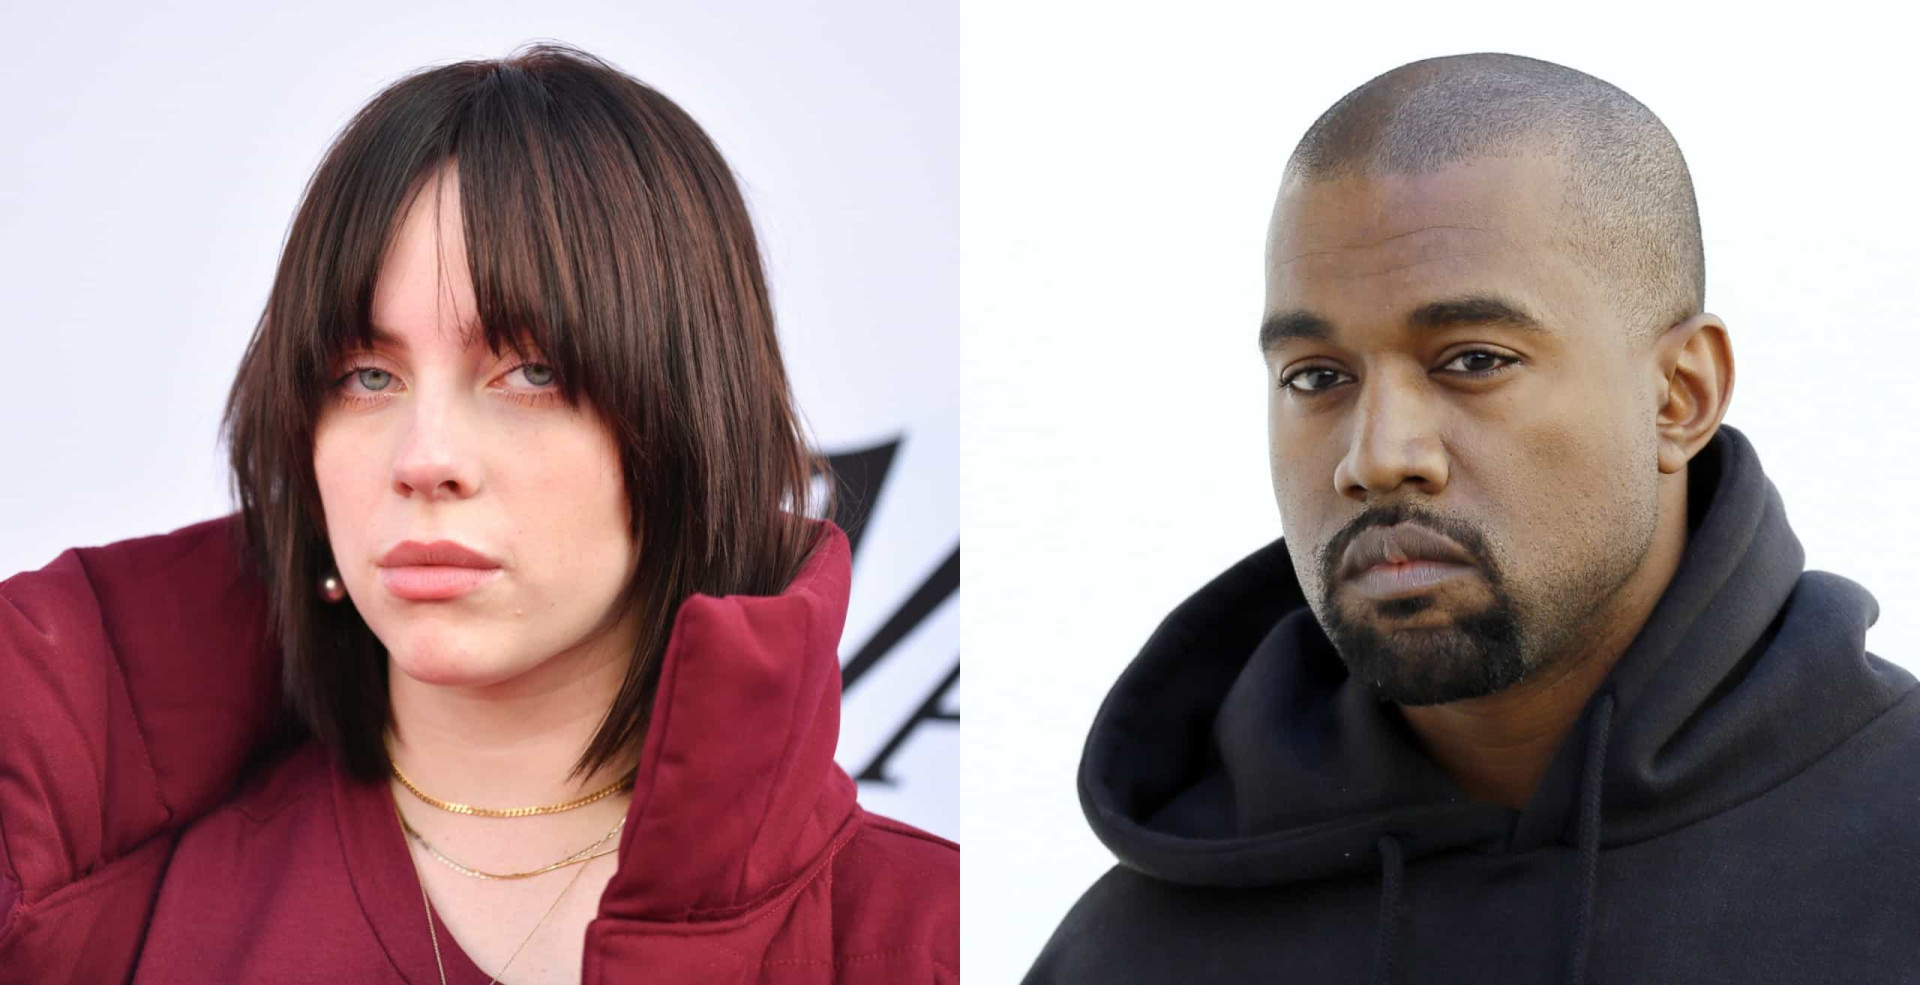 <p>Ye and Billie Eilish, co-headliners at Coachella, found themselves in a feud after Ye called her out for a comment she made during a recent concert in Atlanta. Eilish had halted her performance to address a distressed fan, reassuring the audience that her priority was their safety and well-being. From the stage, Eilish said "Don’t crowd…We’re taking care of our people, hold on. I wait for people to be ok until I keep going.” Ye interpreted these comments as an indirect diss to Travis Scott, who unknowingly continued performing while dozens of fans were injured, and some killed, in the crowd at Astroworld. He took to Instagram to accuse her of dissing Scott, and said "Come on Billie we love you. Please apologize to Trav and to the families of the people who lost their lives. No one intended this to happen.” He added, “Trav didn’t have any idea of what was happening when he was on stage and was very hurt by what happened, and yes Trav will be with me at Coachella, but now I need Billie to apologize before I perform.” Eilish responded a couple of hours later saying "Literally never said a thing about Travis. Was just helping a fan."  </p><p><a href="https://www.msn.com/en-us/community/channel/vid-7xx8mnucu55yw63we9va2gwr7uihbxwc68fxqp25x6tg4ftibpra?cvid=94631541bc0f4f89bfd59158d696ad7e">Follow us and access great exclusive content every day</a></p>